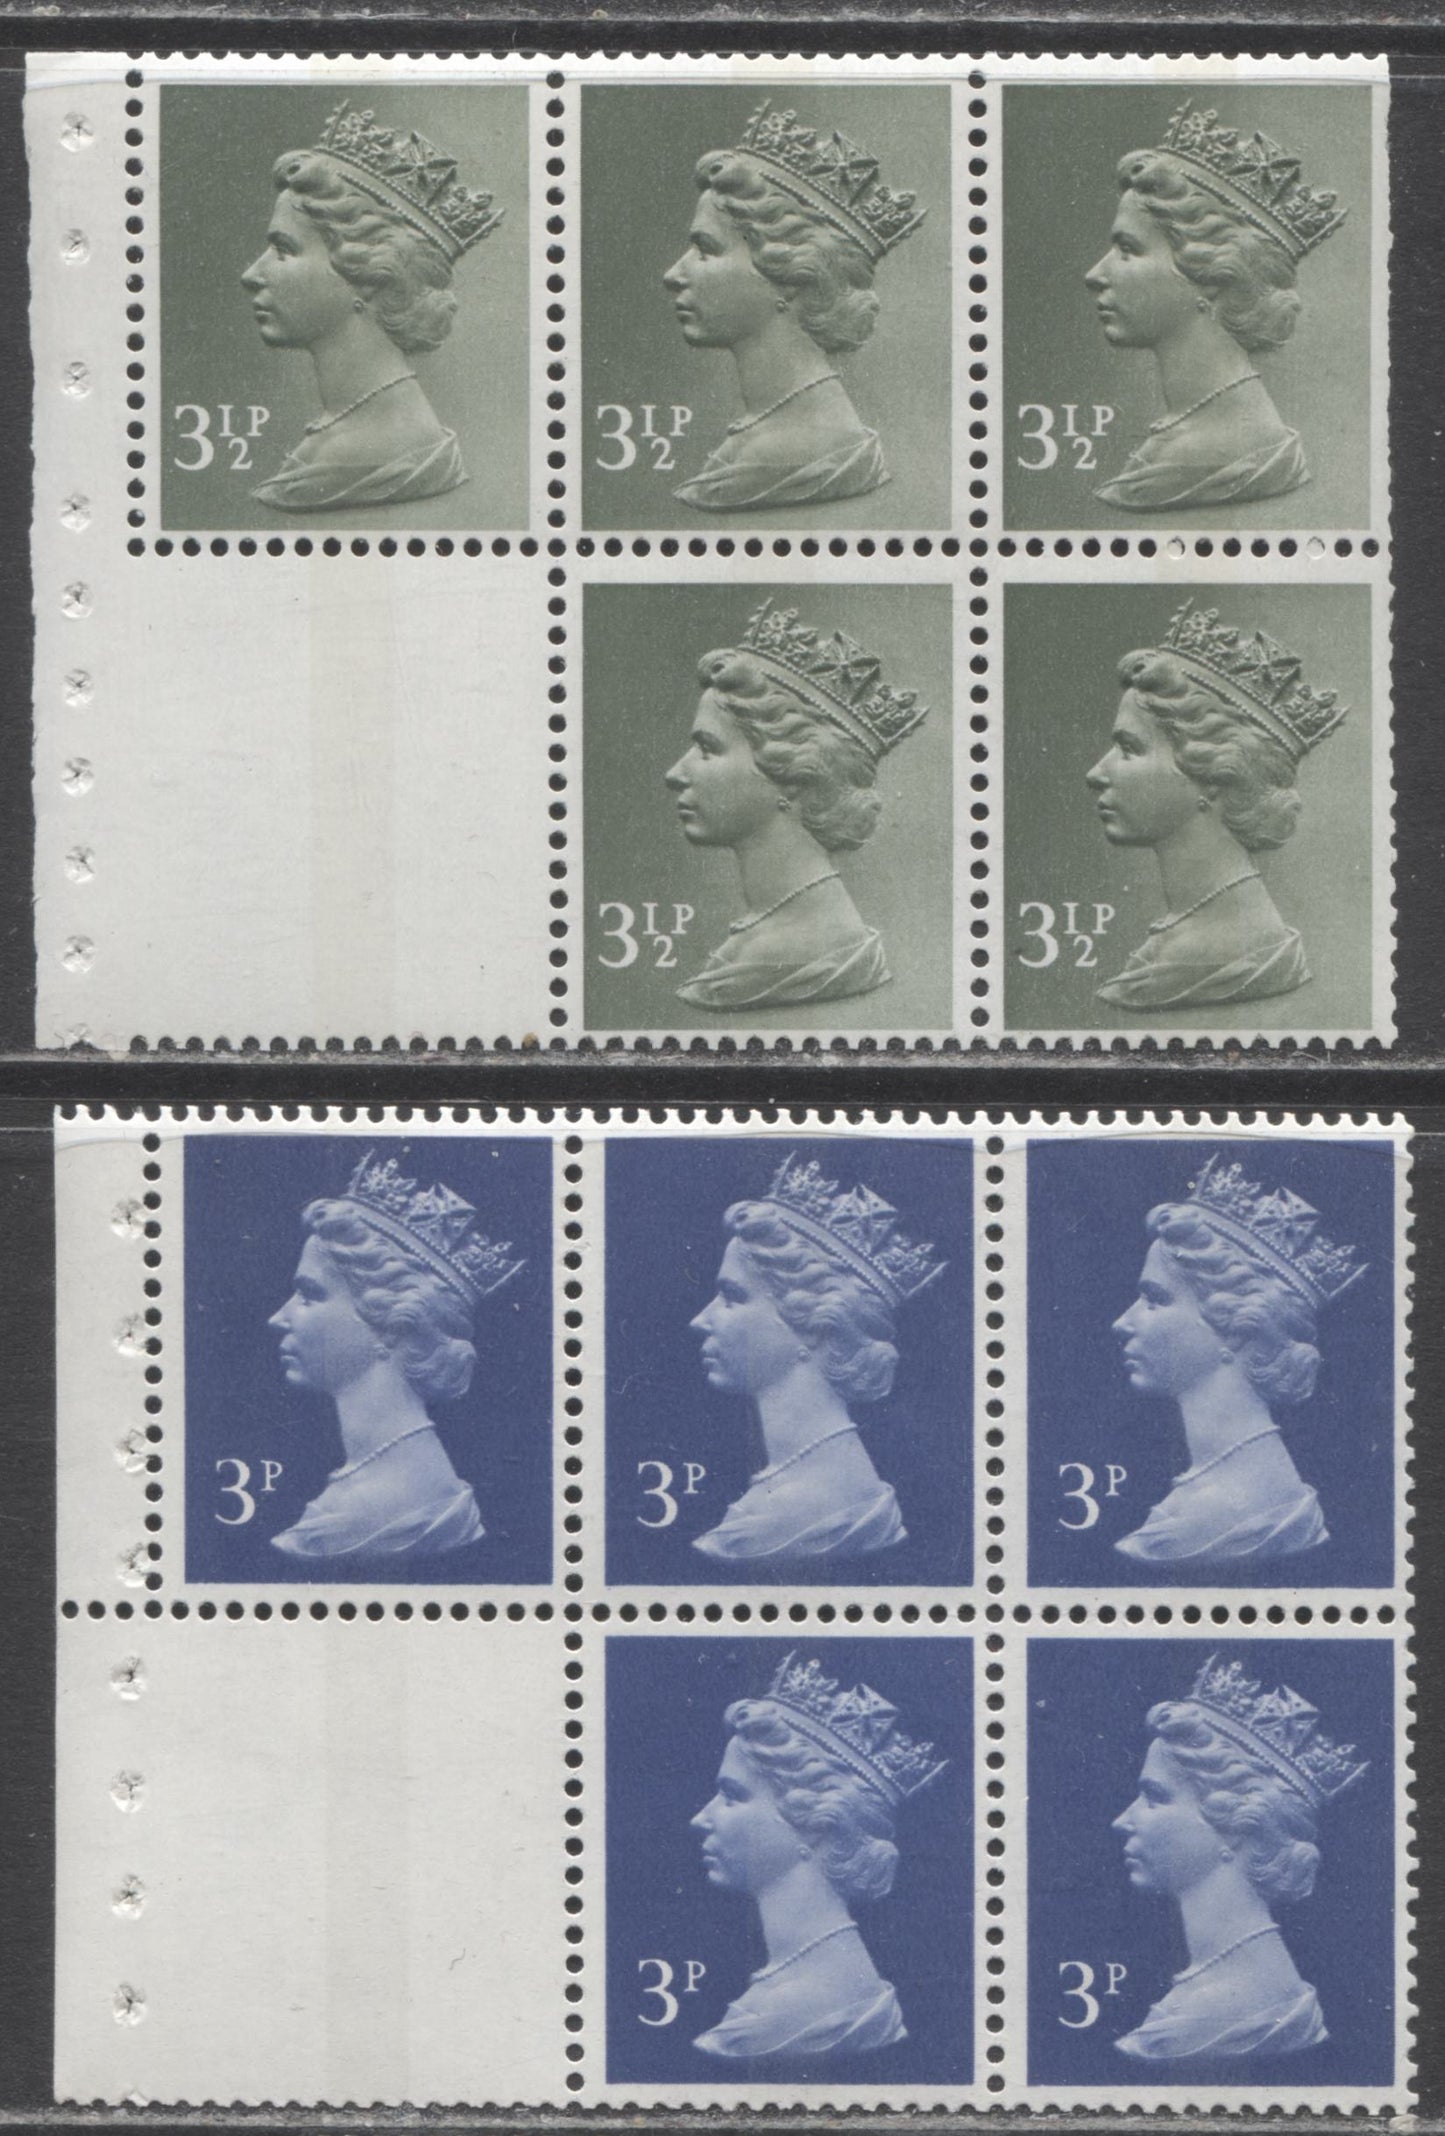 Lot 380 Great Britain X856, X859 1974 2 F/VFNH Unlisted Booklet Panes Of 5 + Imperf Label Machin Heads On HB/HF FCP With Streaky, Dull Greenish PVAD Gum, Center Bands, Click on Listing to See ALL Pictures, Unlisted in Gibbons, Net. Est. $5